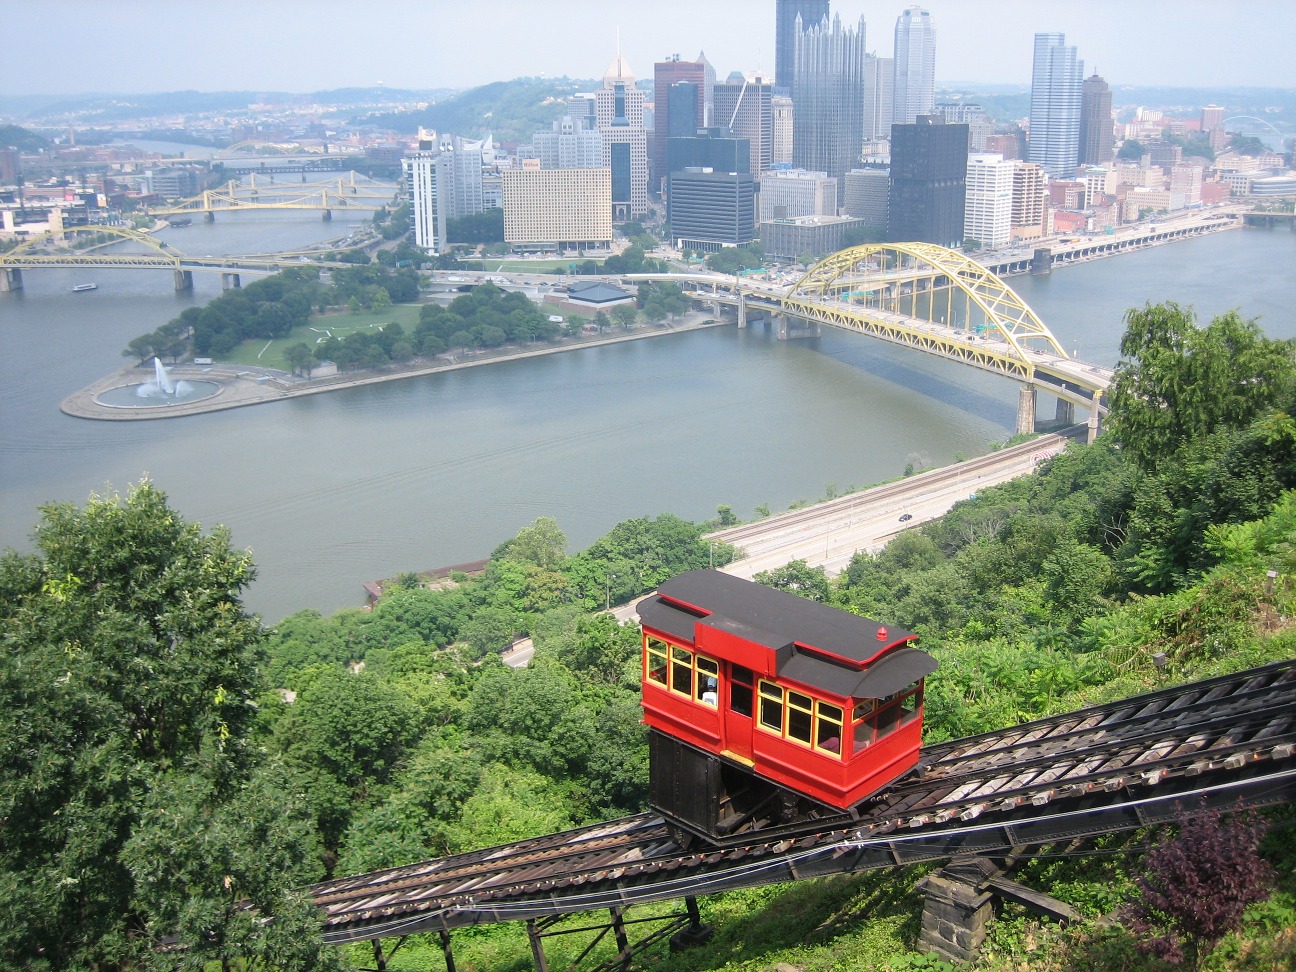 Duquesne_Incline_from_top.jpg